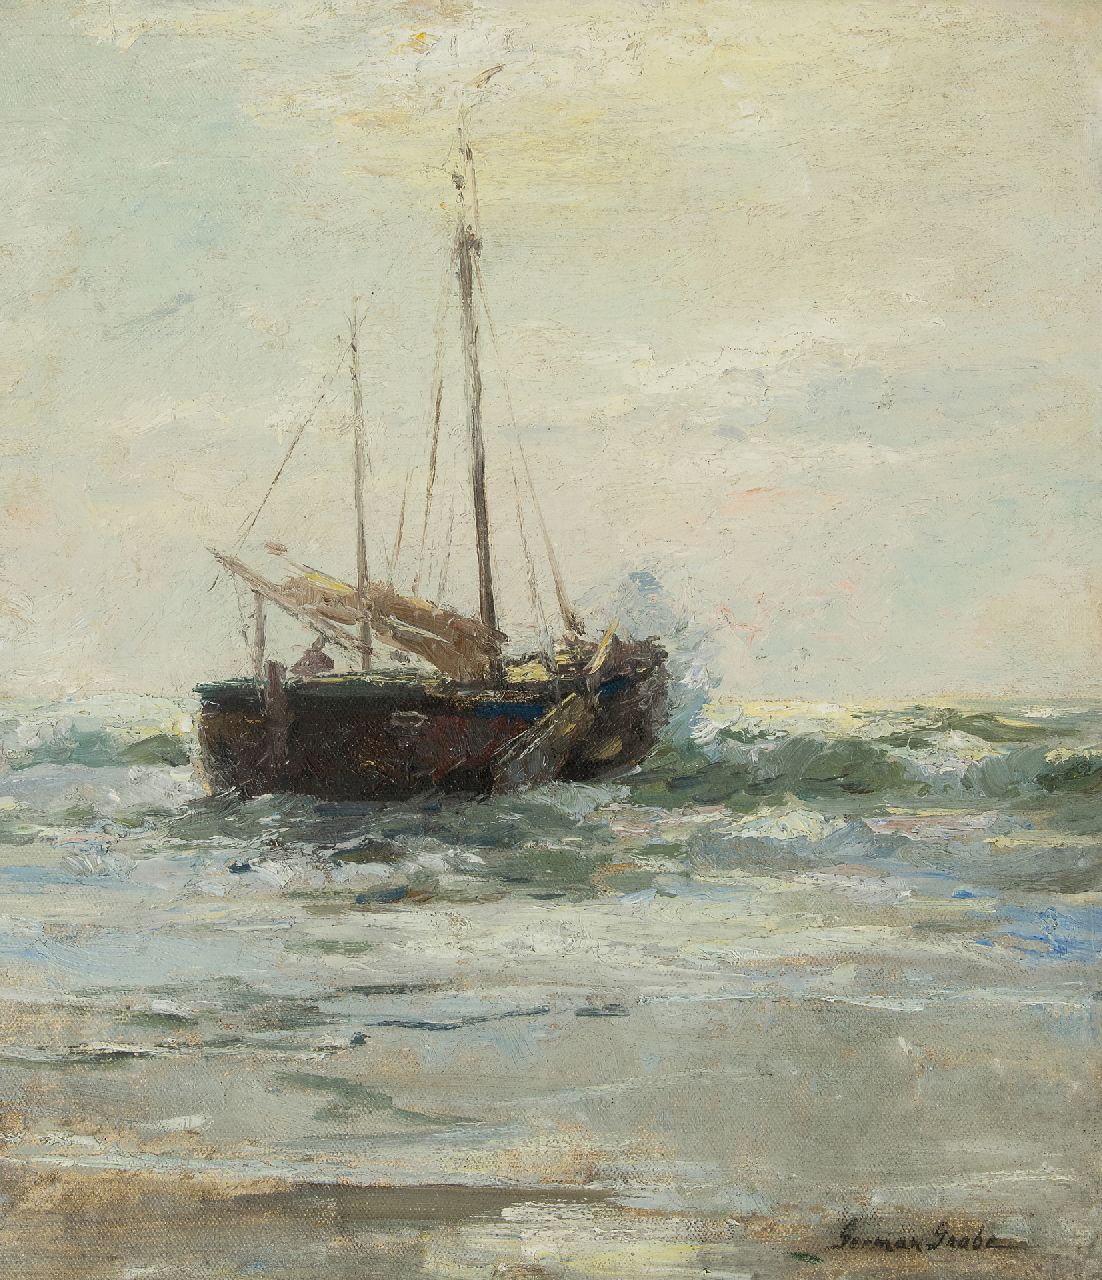 German Grobe | A fishing vesselin the surf, Katwijk, oil on canvas laid down on panel, 46.4 x 40.5 cm, signed l.r.